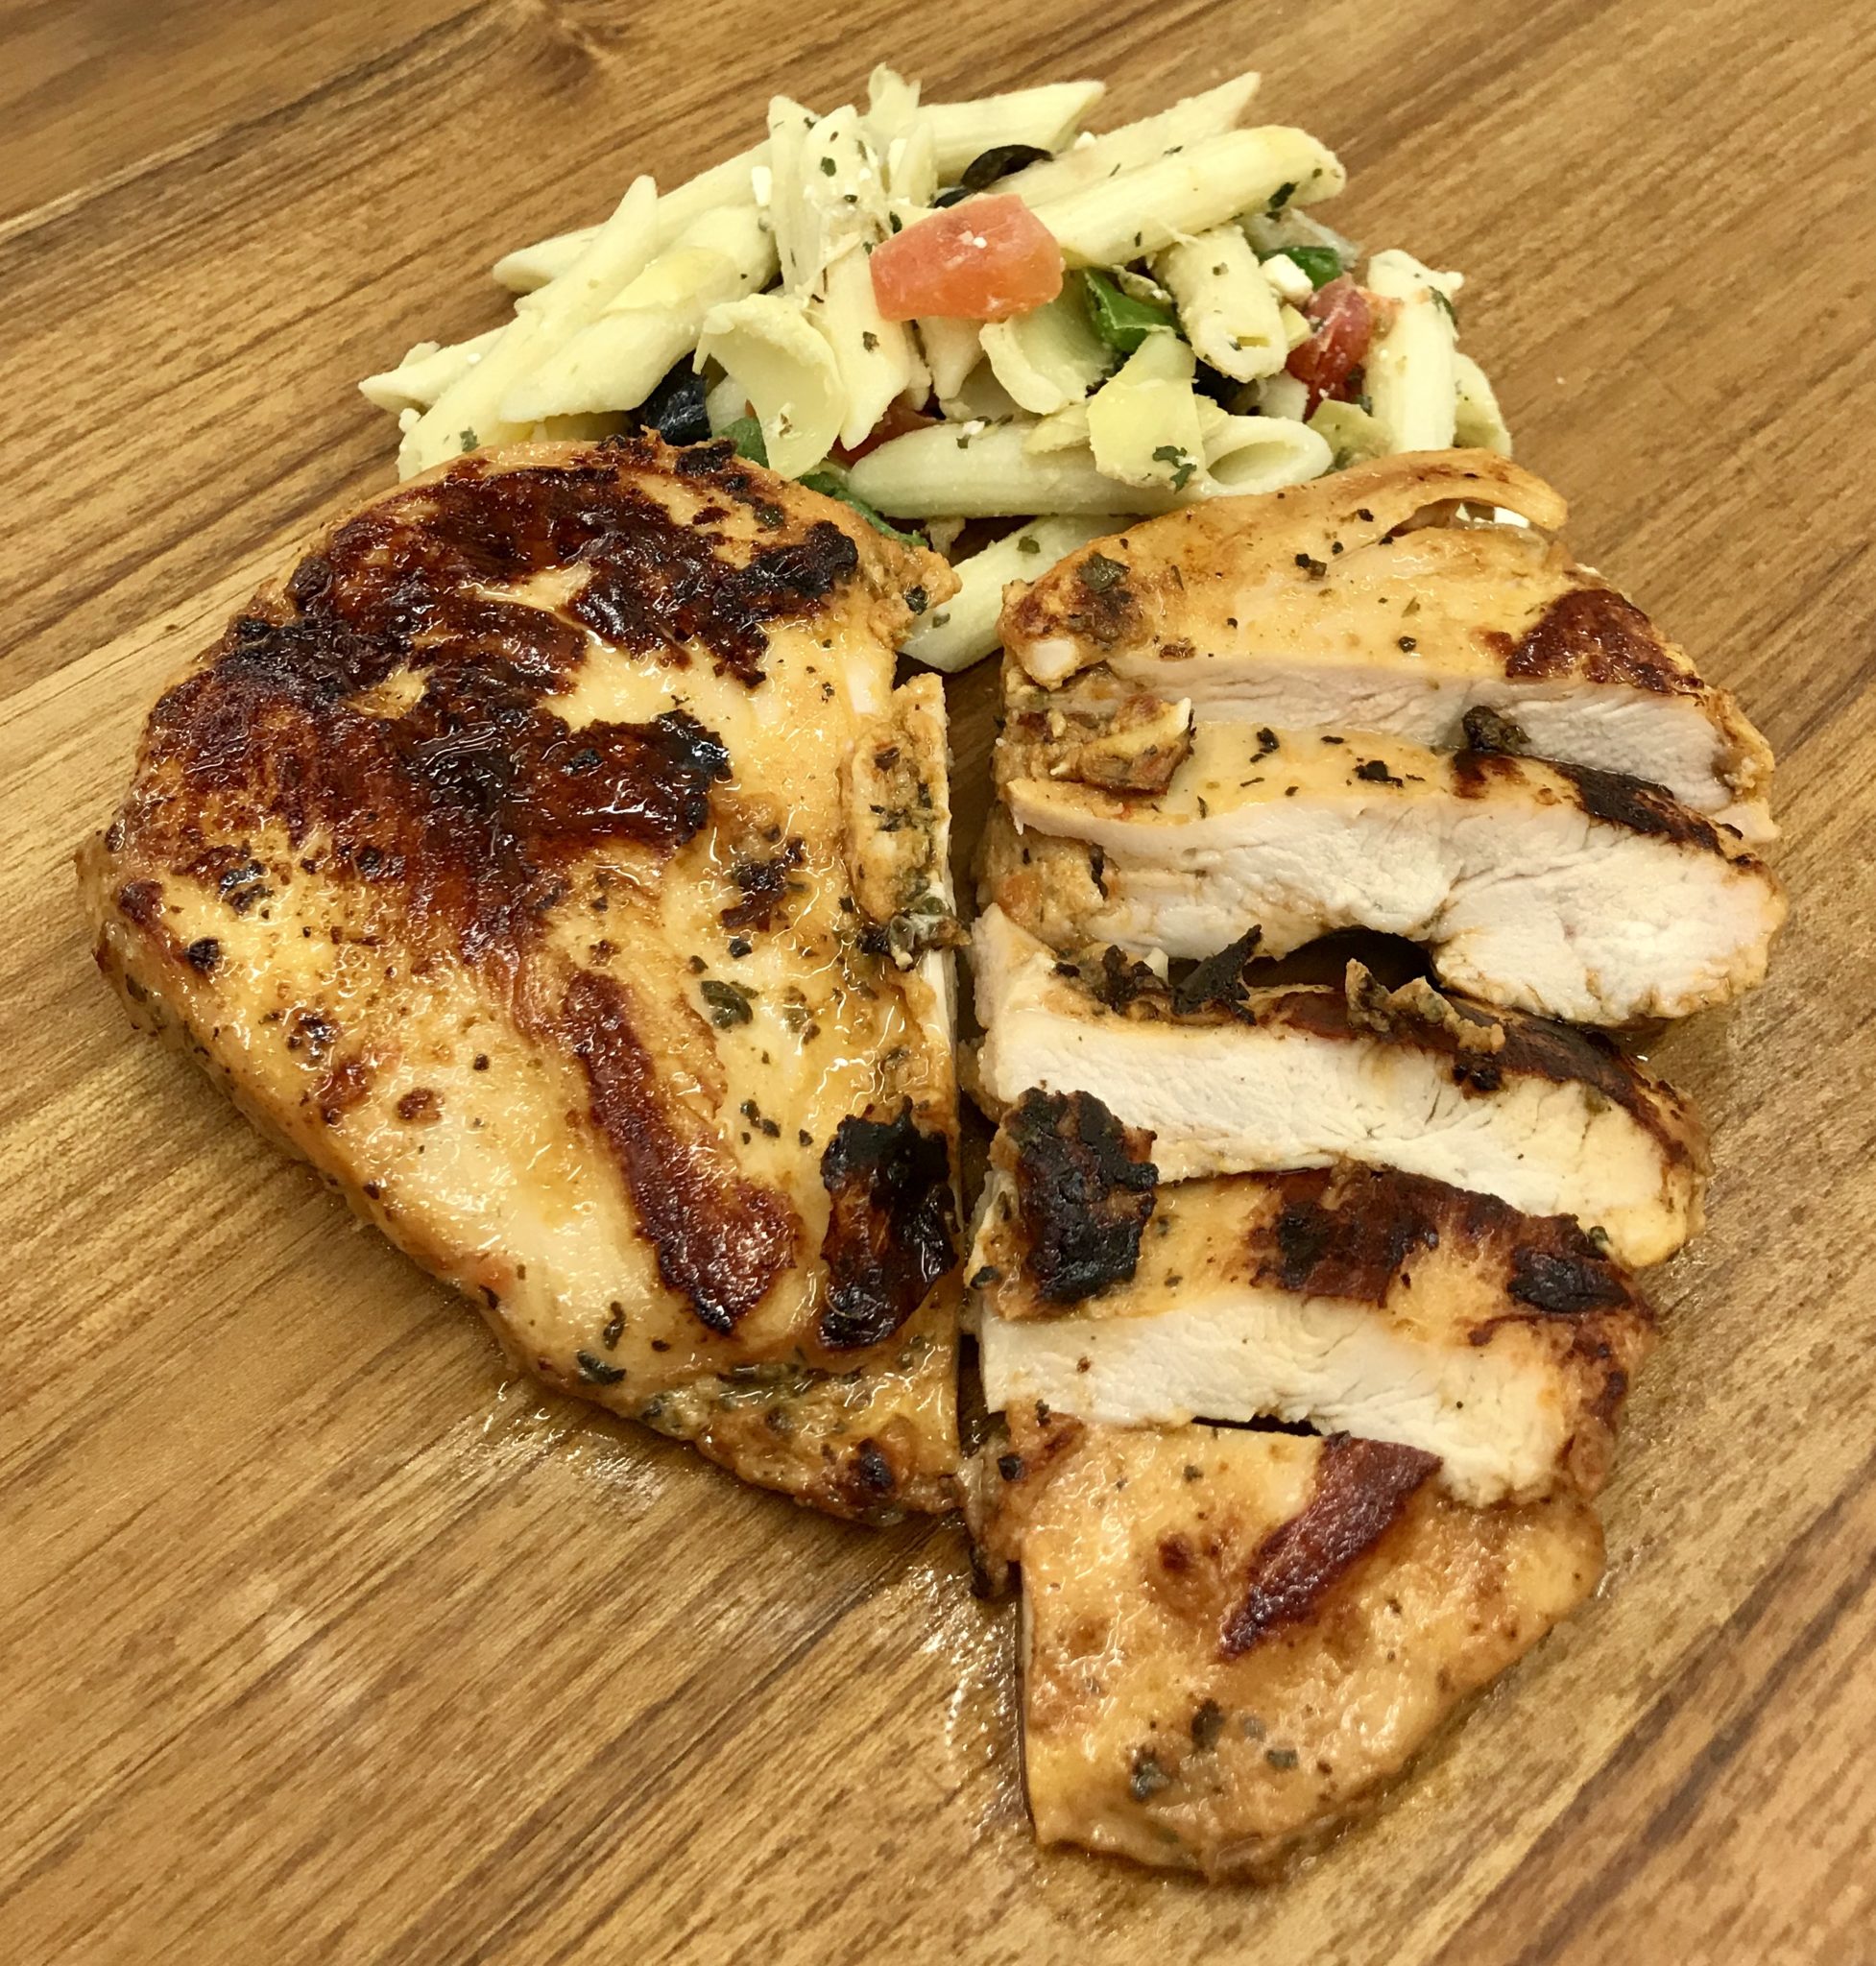 Sundried Tomato and Basil Chicken Breast